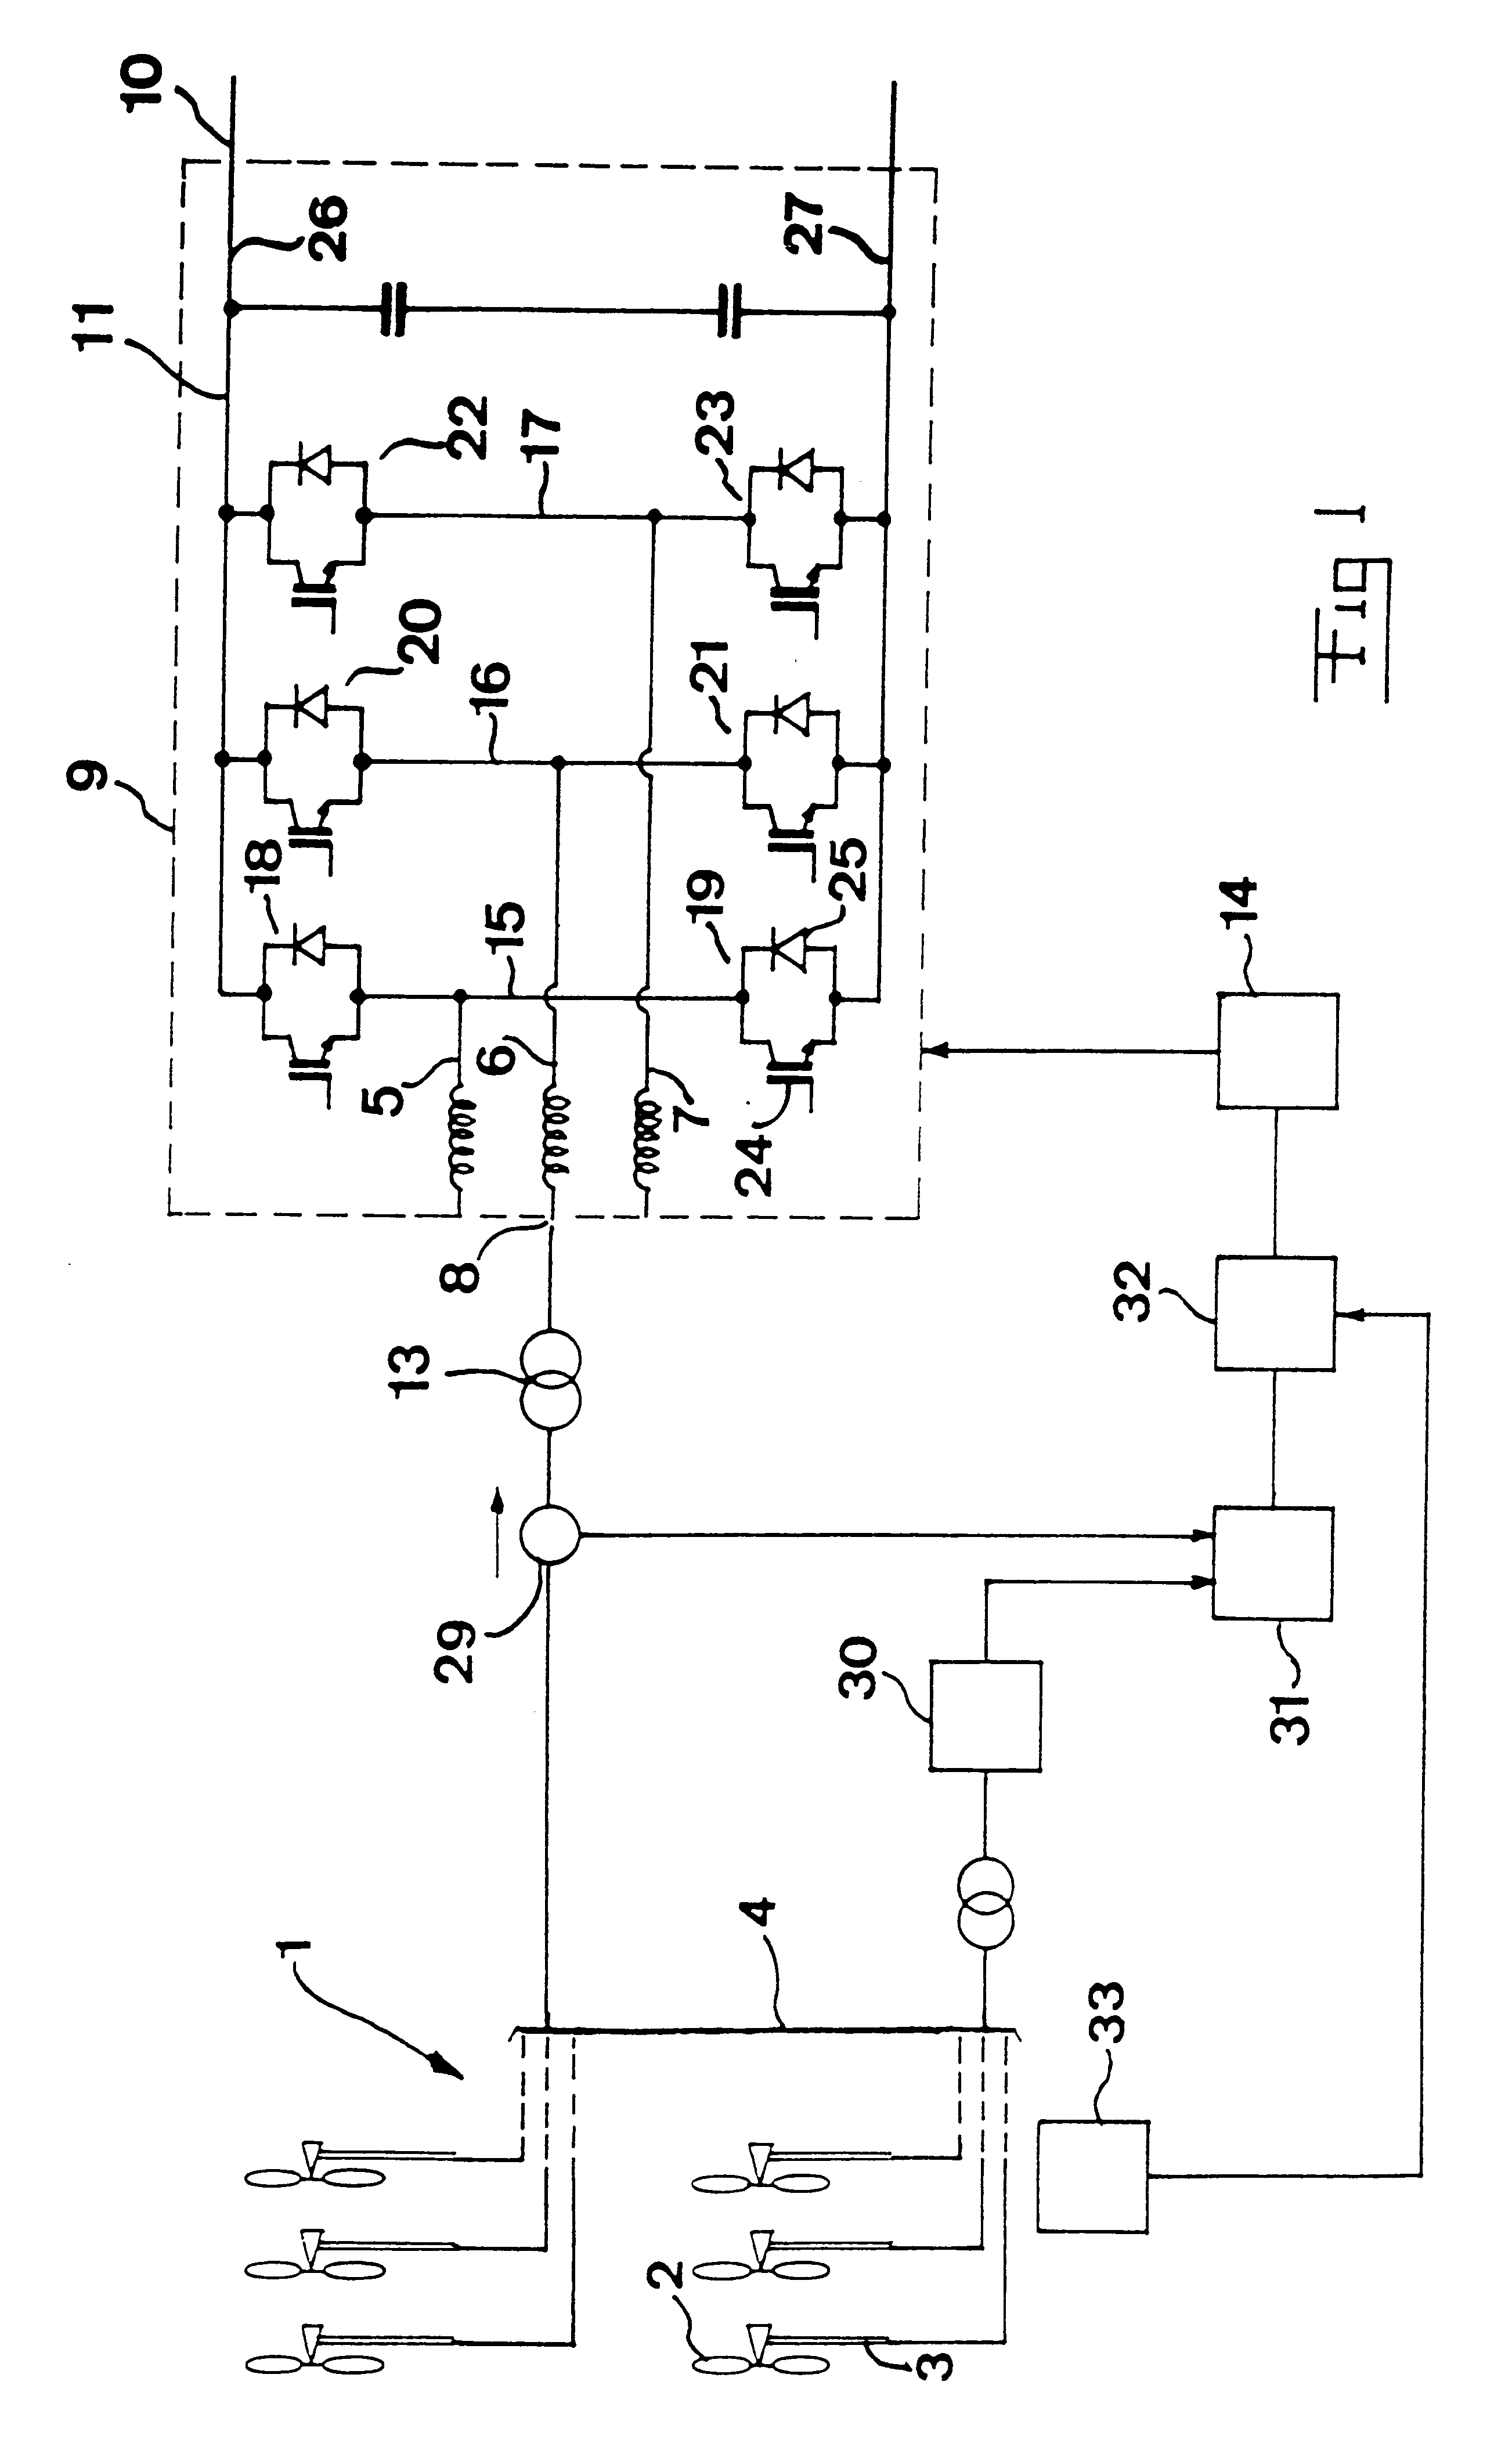 Plant for generating electric power and a method for operation of such a plant